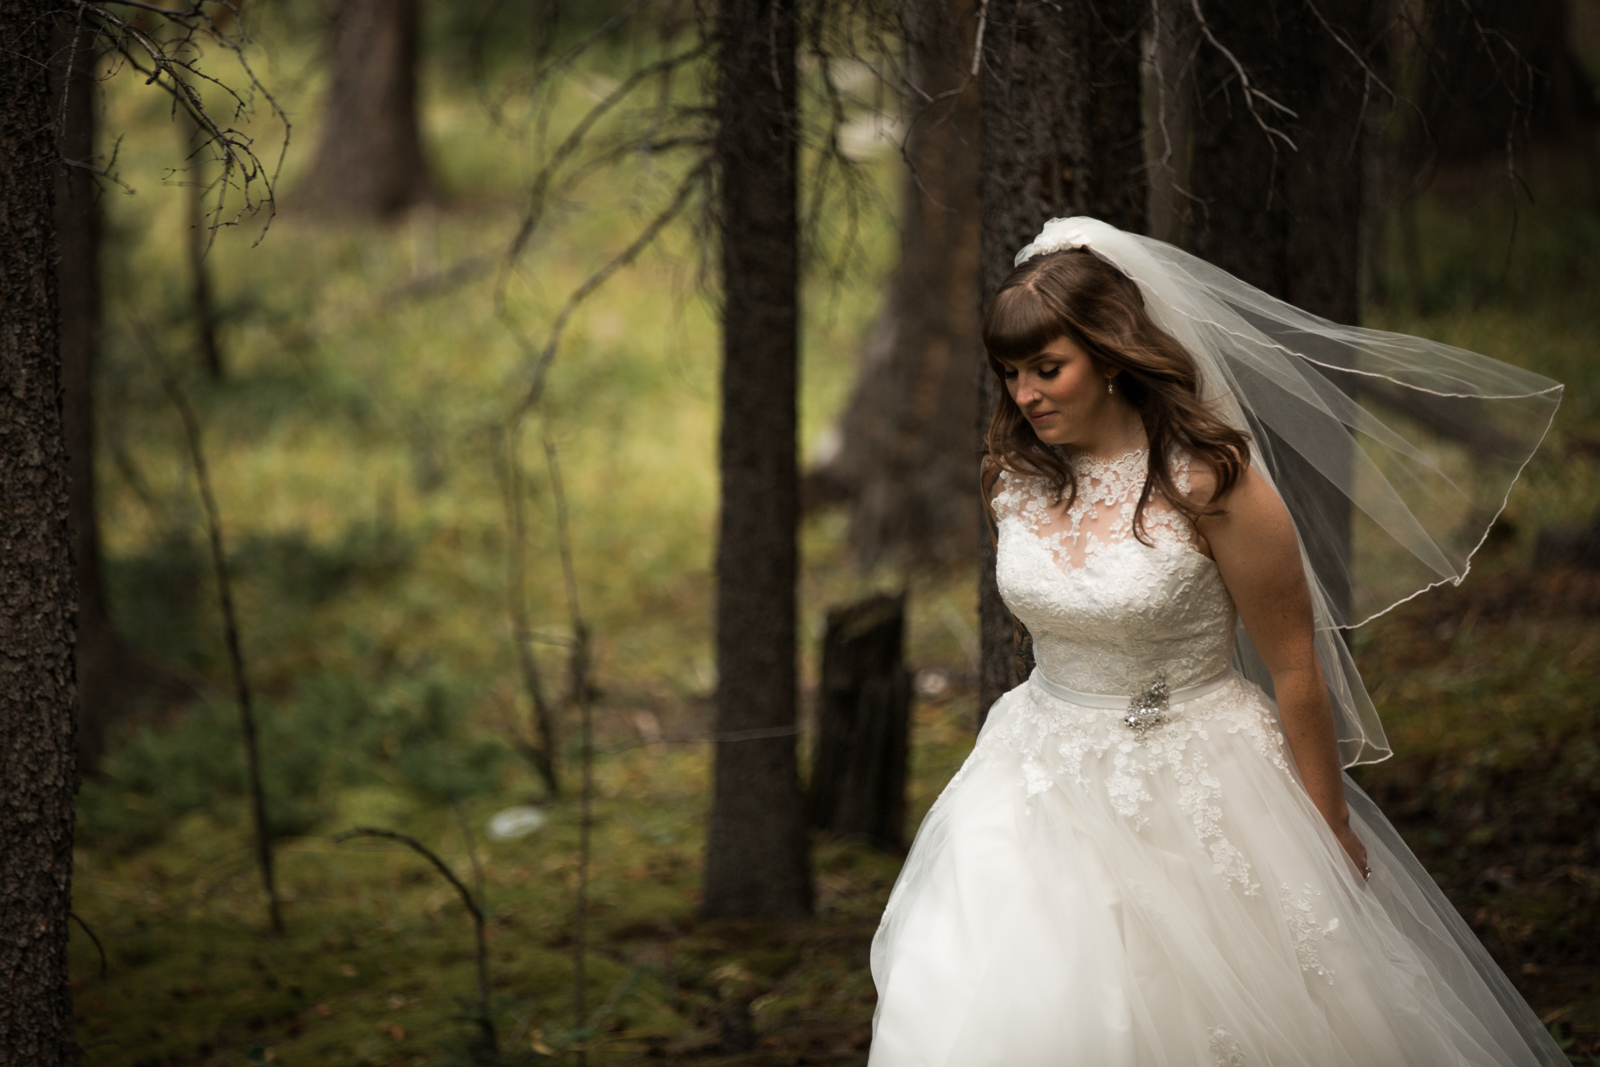 25-willow_and_wolf_photography_stephanie_and_kyle_banff_wedding_blogatp_7575